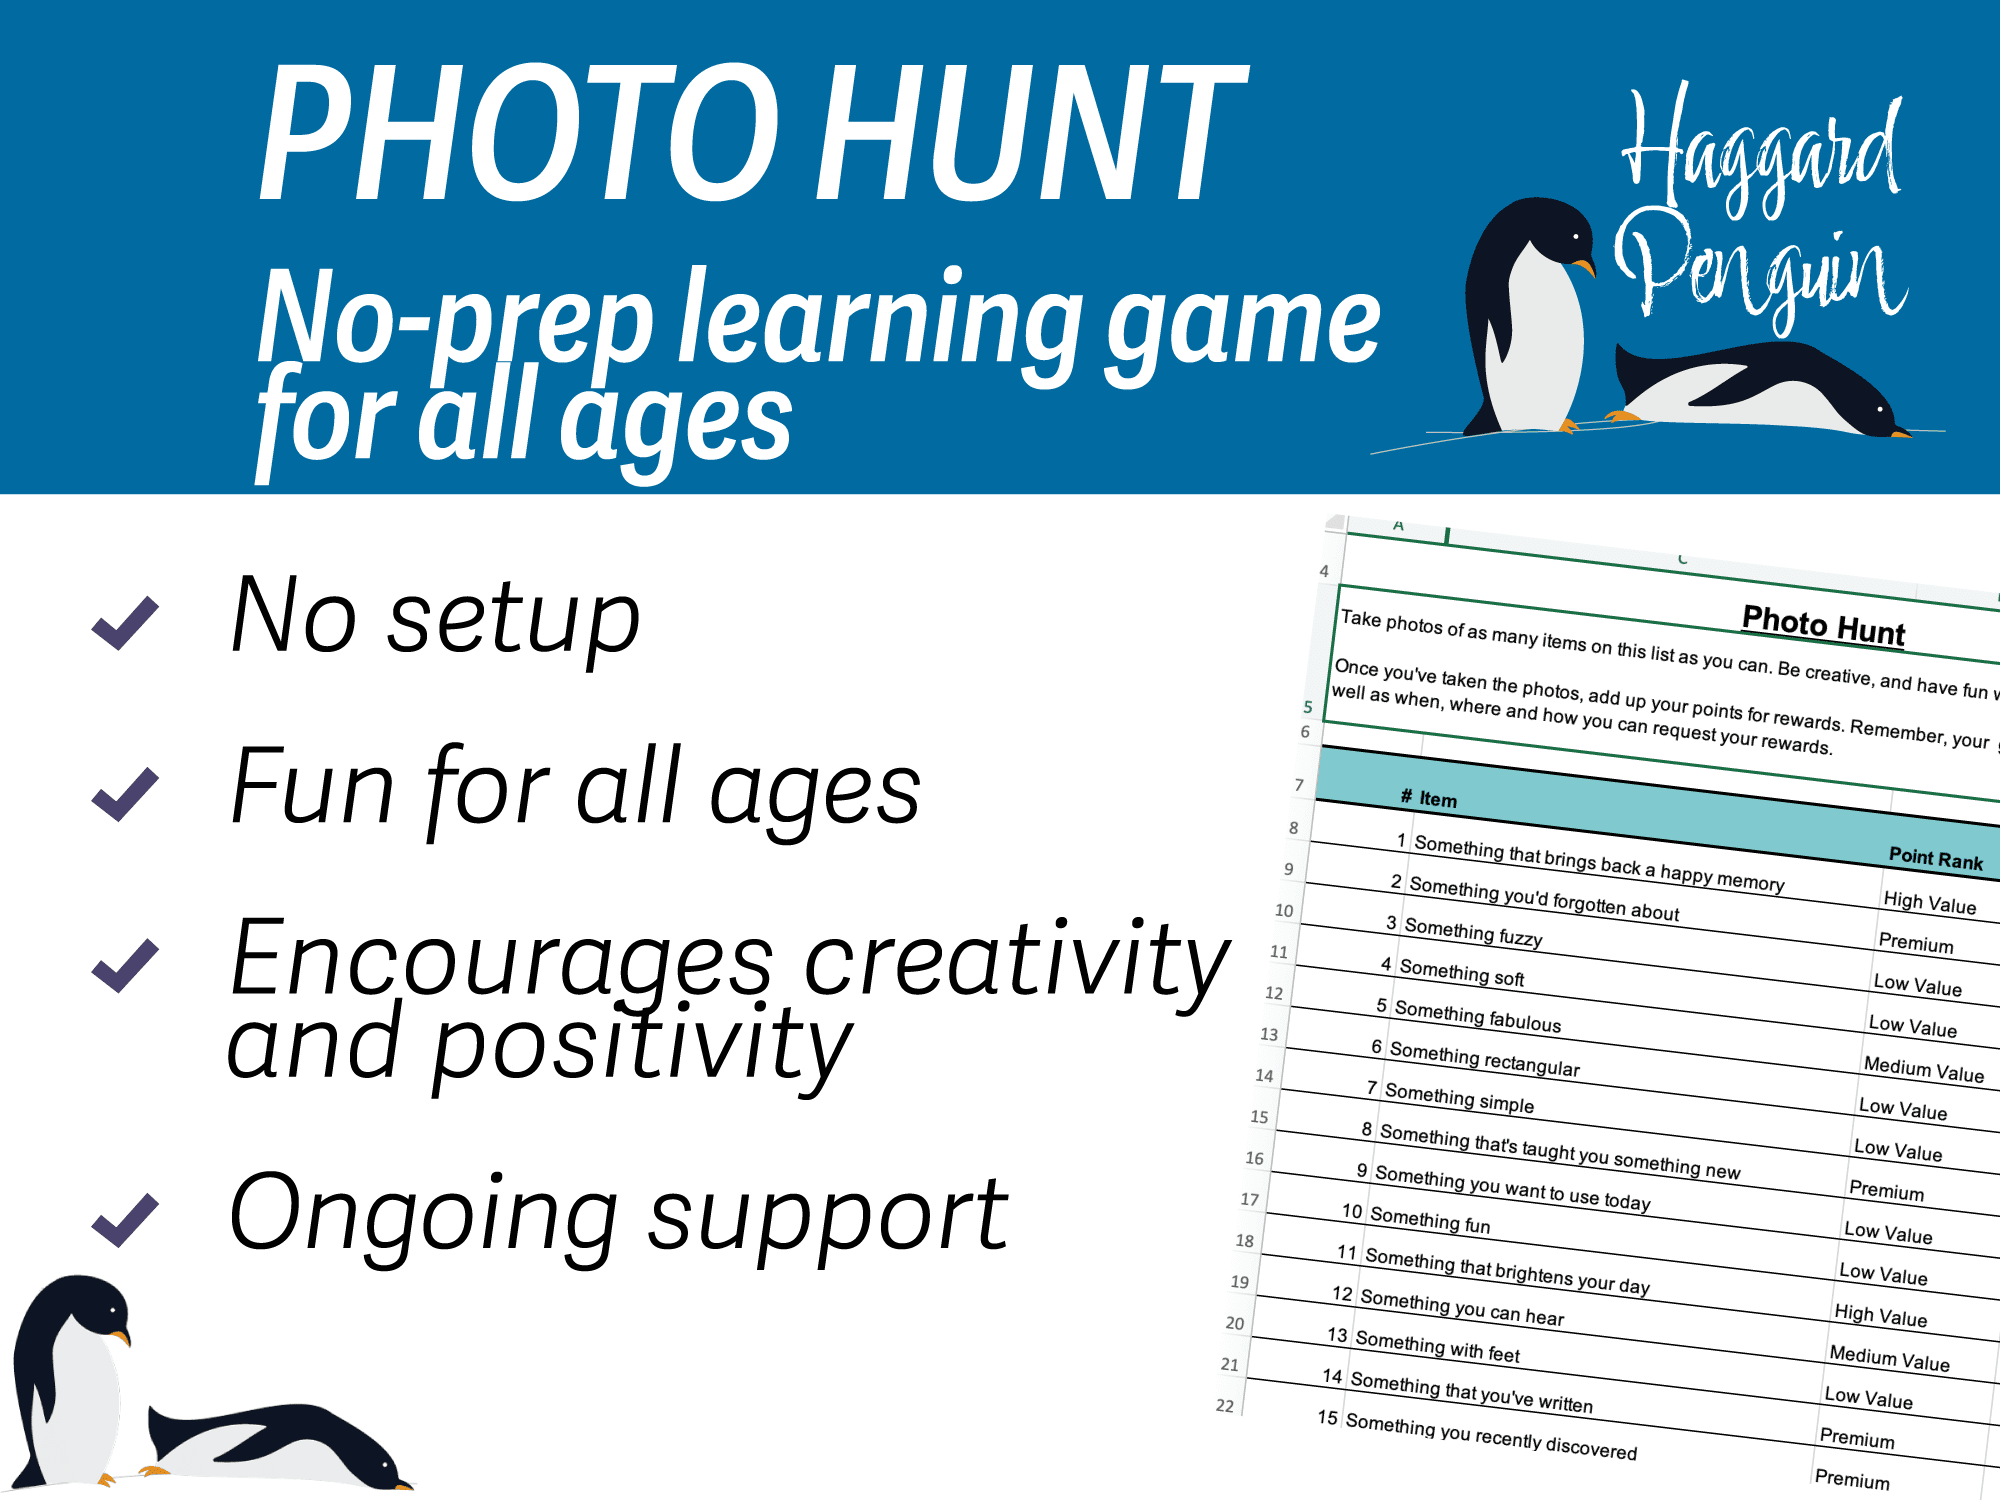 No setup! Fun for all ages. Encourages creativity and positivity. Ongoing support